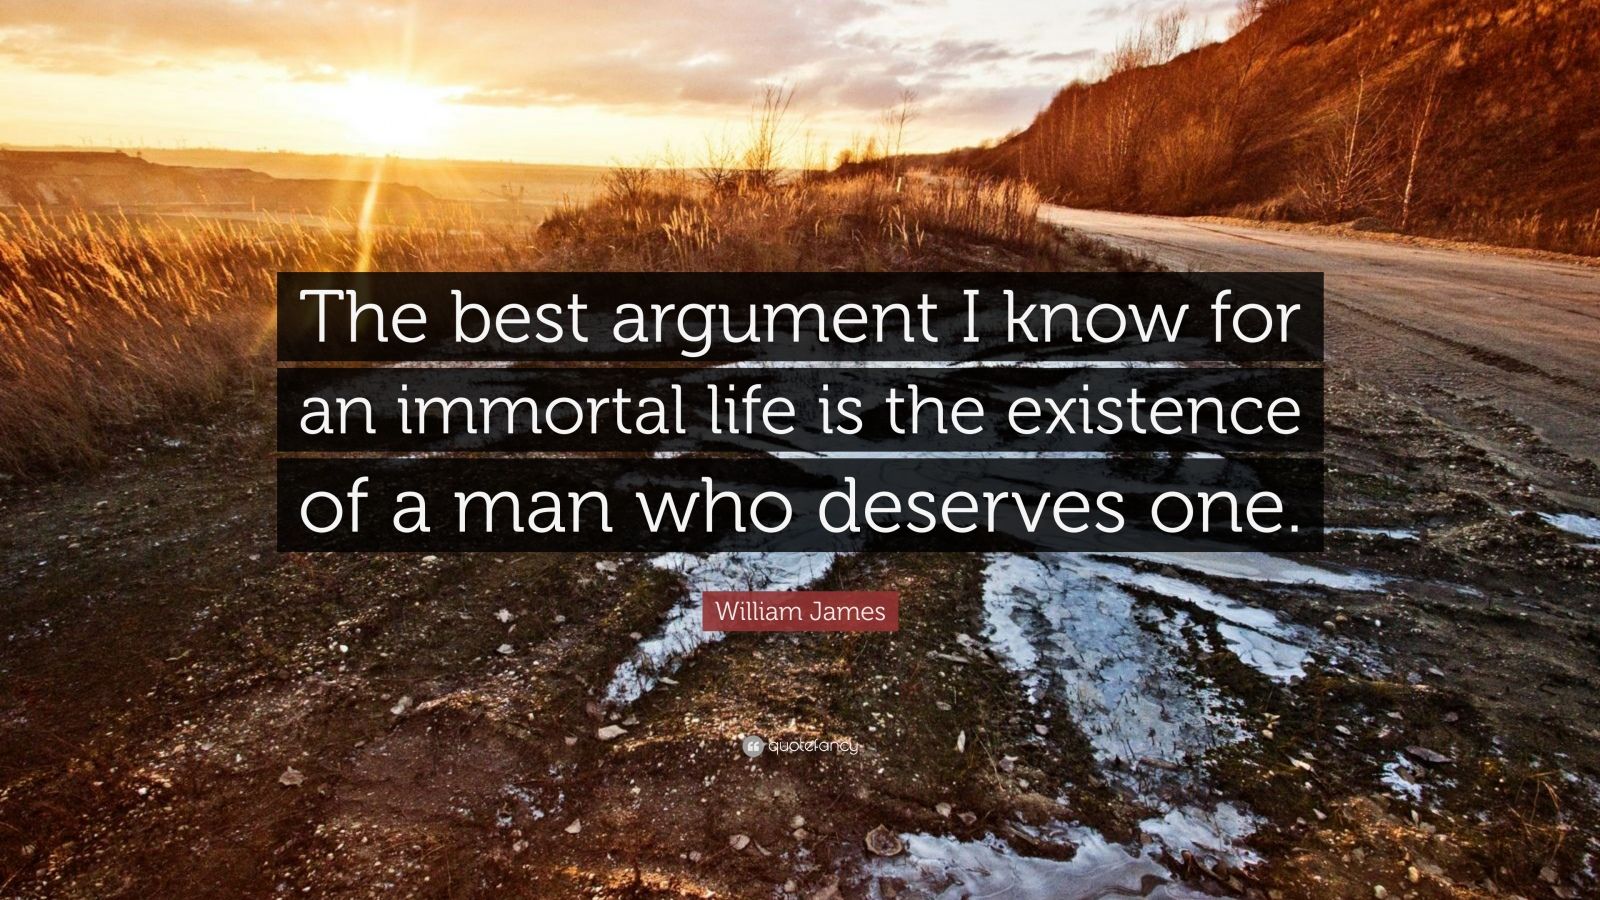 William James Quote “The best argument I know for an immortal life is the